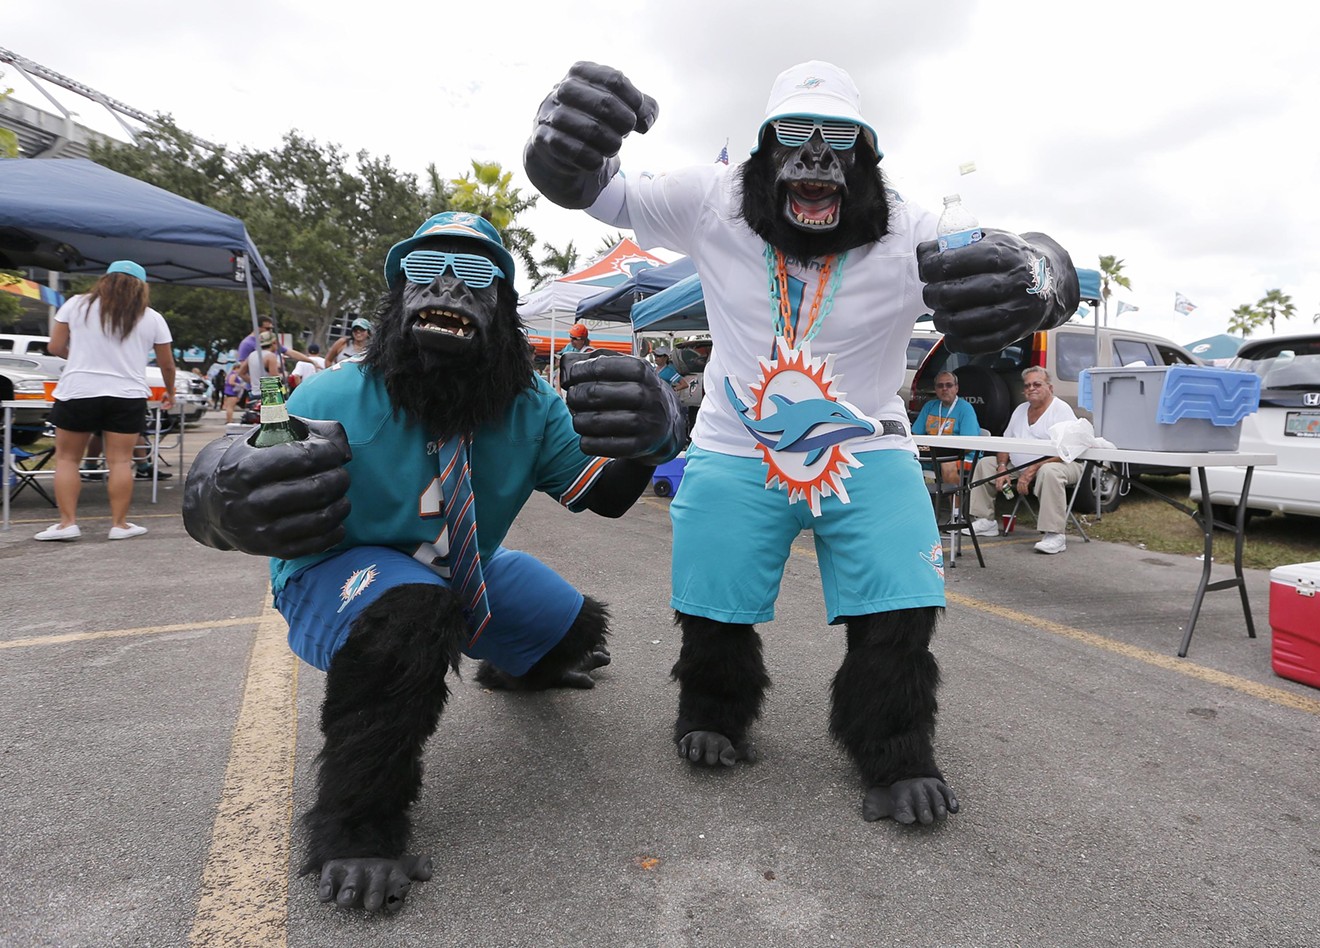 Fans go ape for the Miami Dolphins outside Hard Rock Stadium.